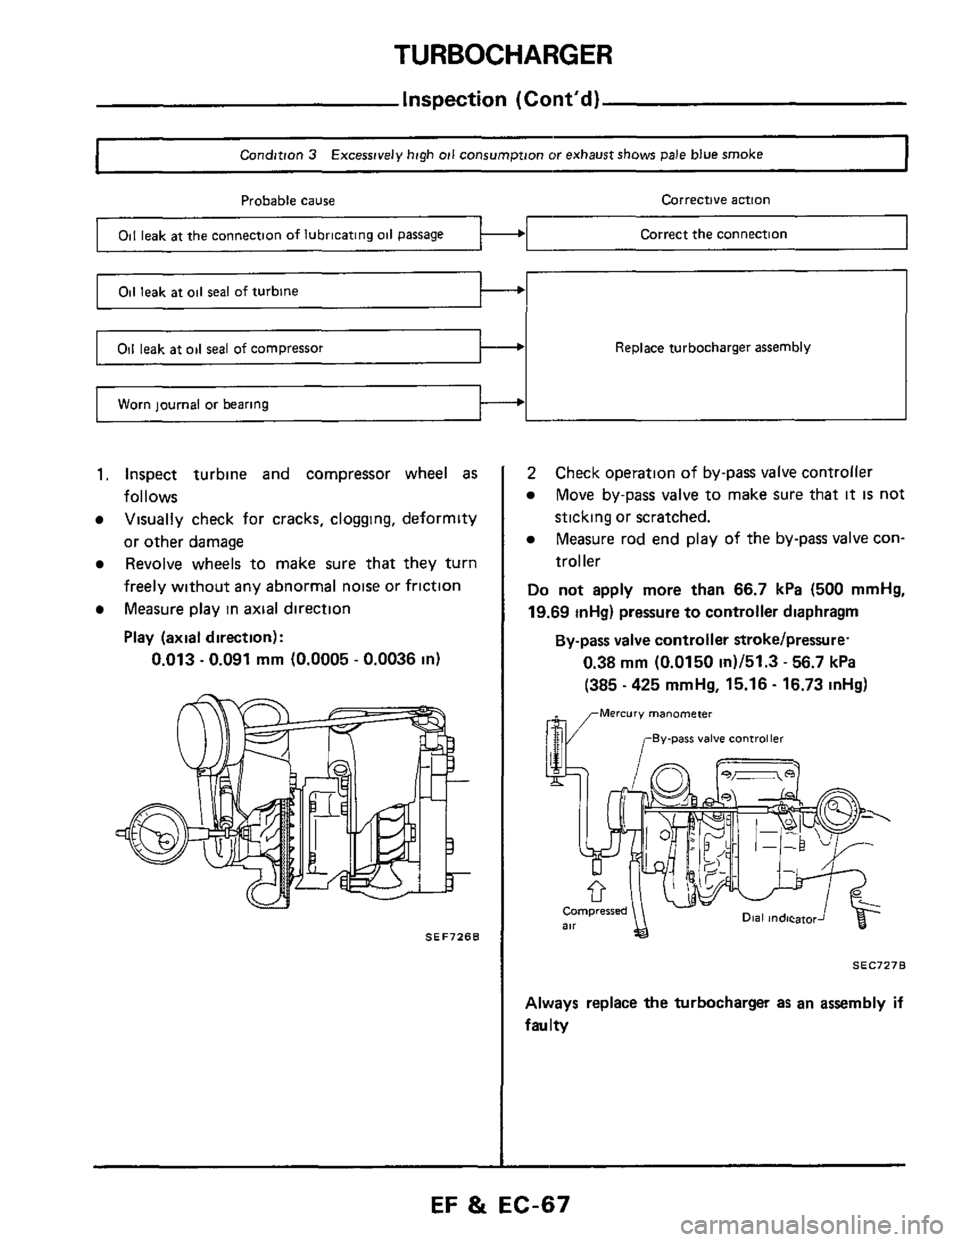 NISSAN 300ZX 1984 Z31 Engine Fuel And Emission Control System Repair Manual TURBOCHARGER 
Worn journal  or bearing 
Inspection (Cont’d) 
Replace  turbocharger  assembly 
I Condition 3 Excessively high oil consumption  or exhaust shows pale  blue  smoke I 
Probable  cause  C